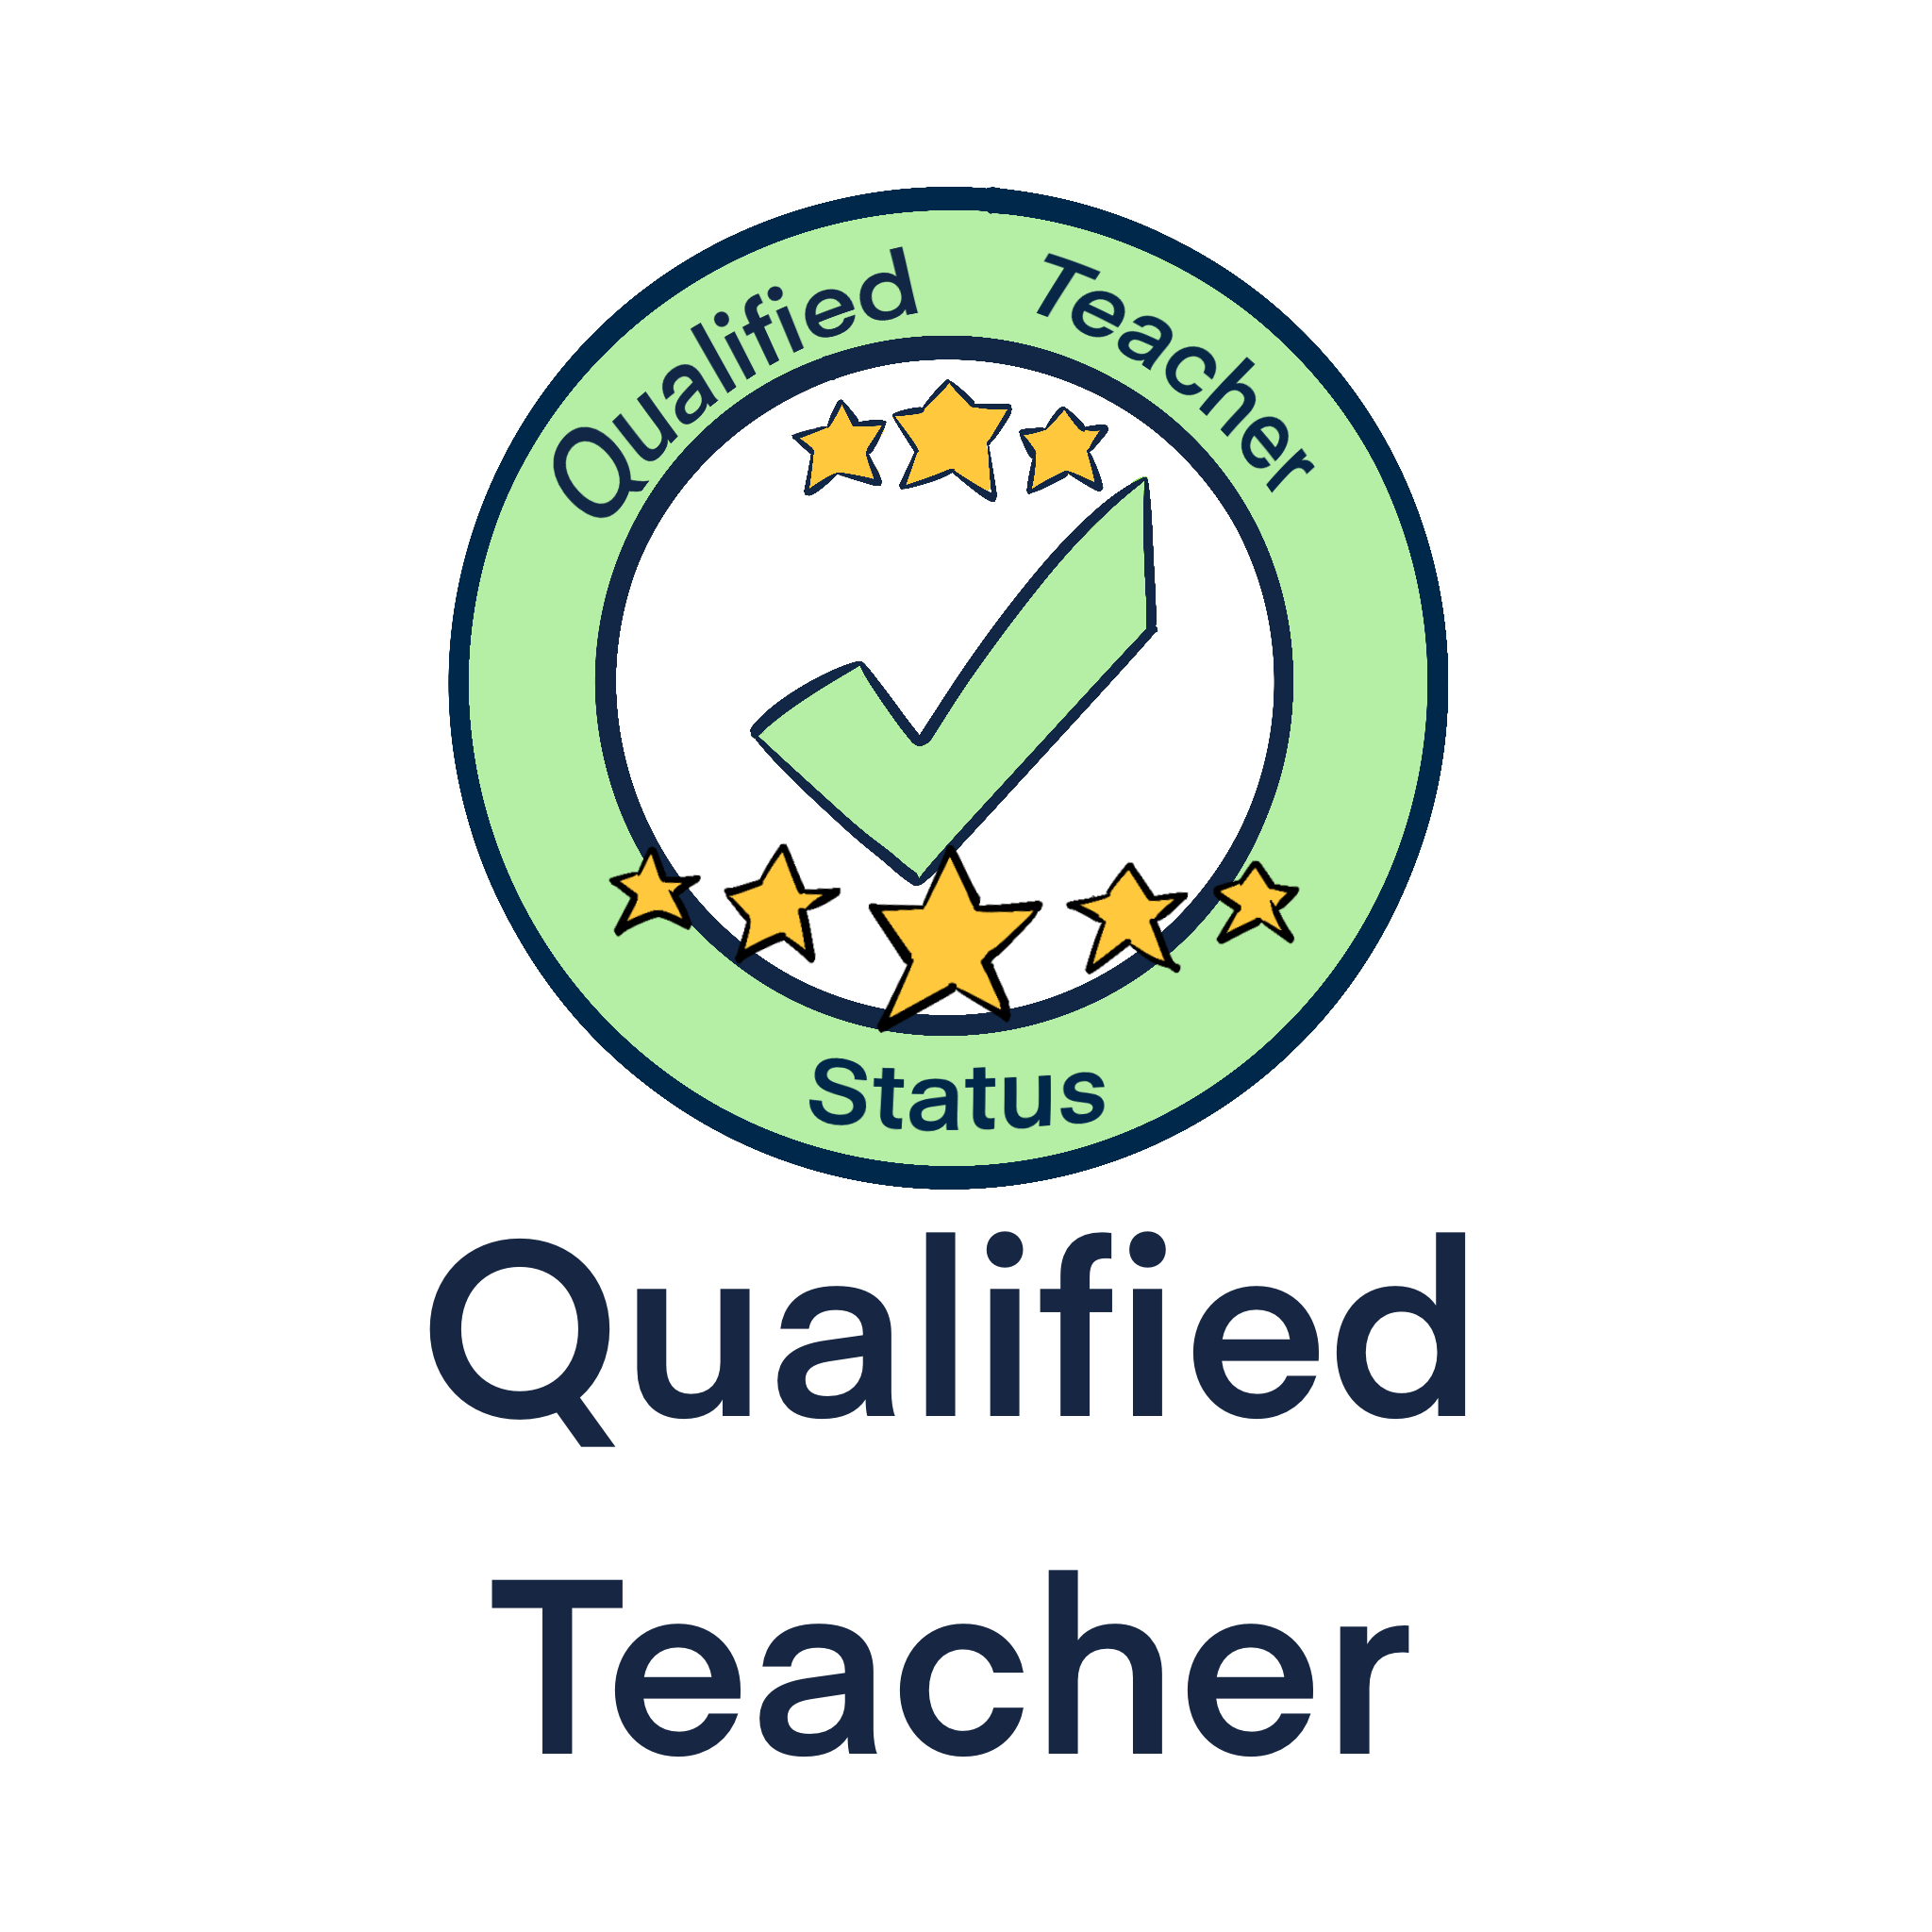 Like all our tutors, Carl is a qualified teacher